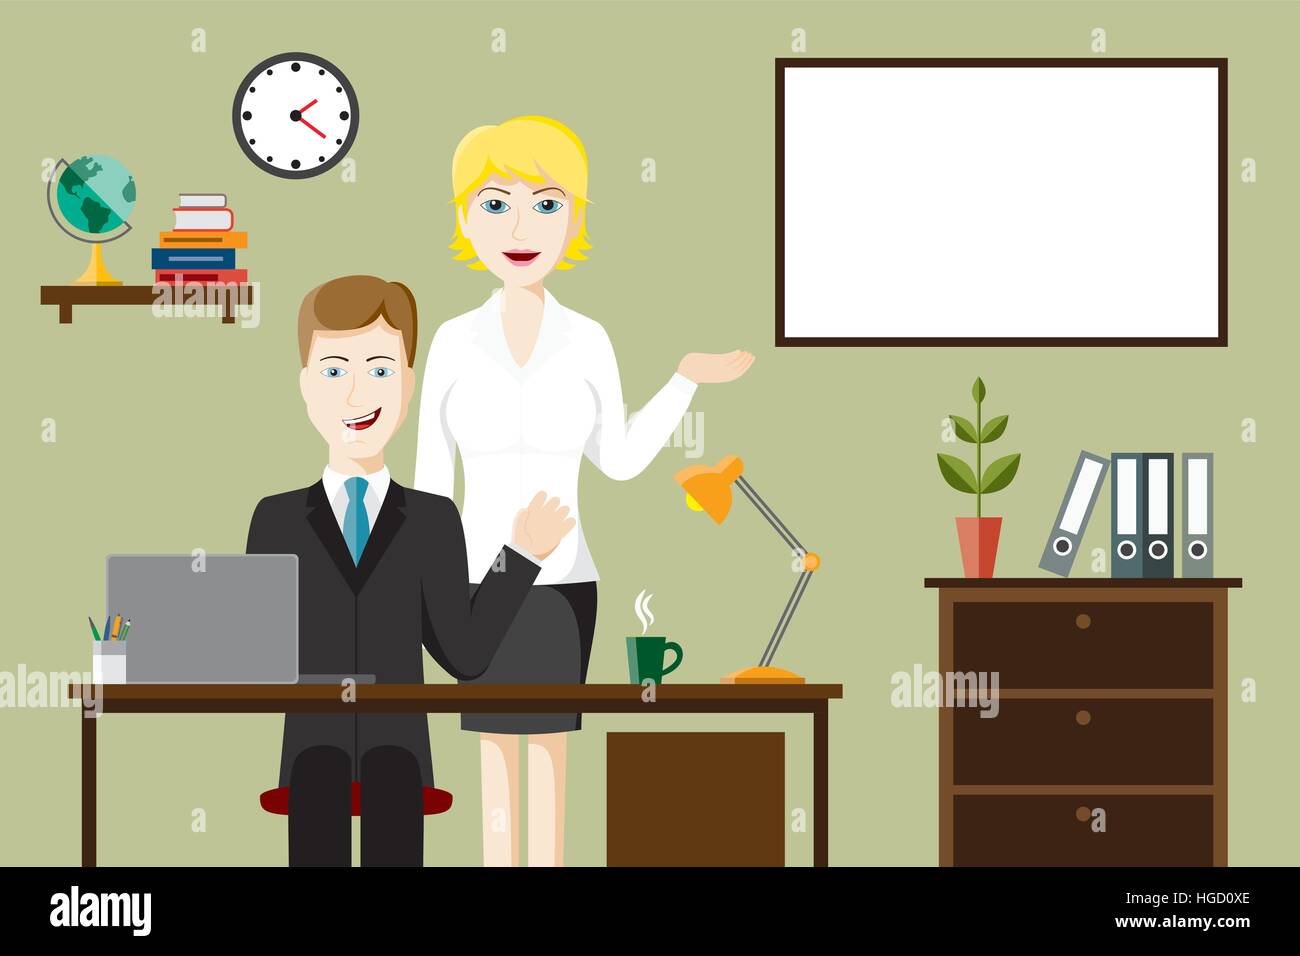 Two business people in an office Stock Vector